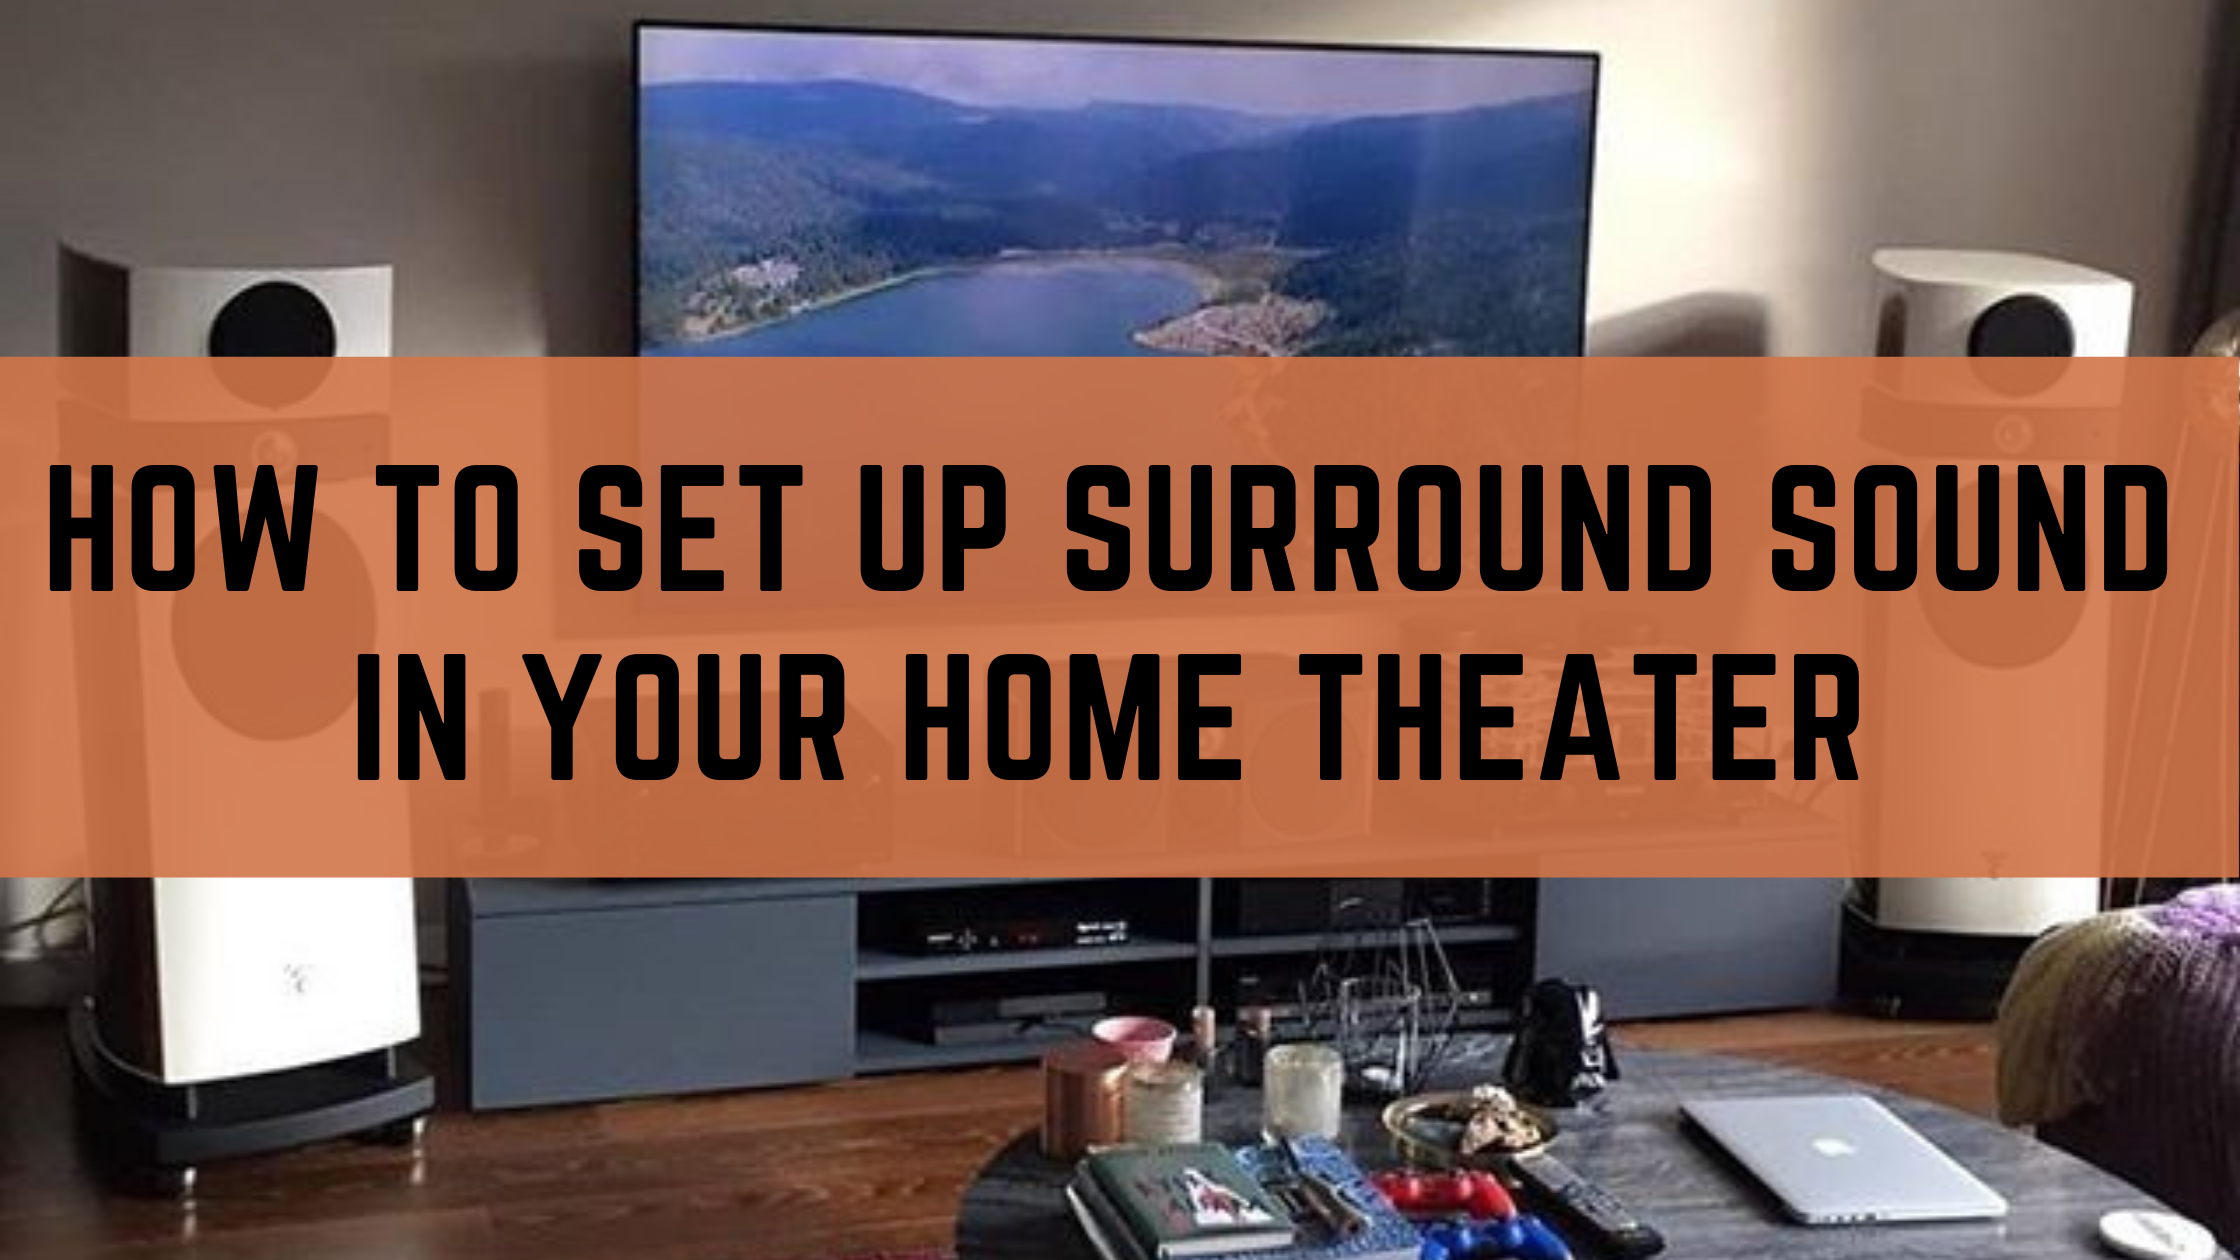 3. How To Set Up Surround Sound In Your Home Theater